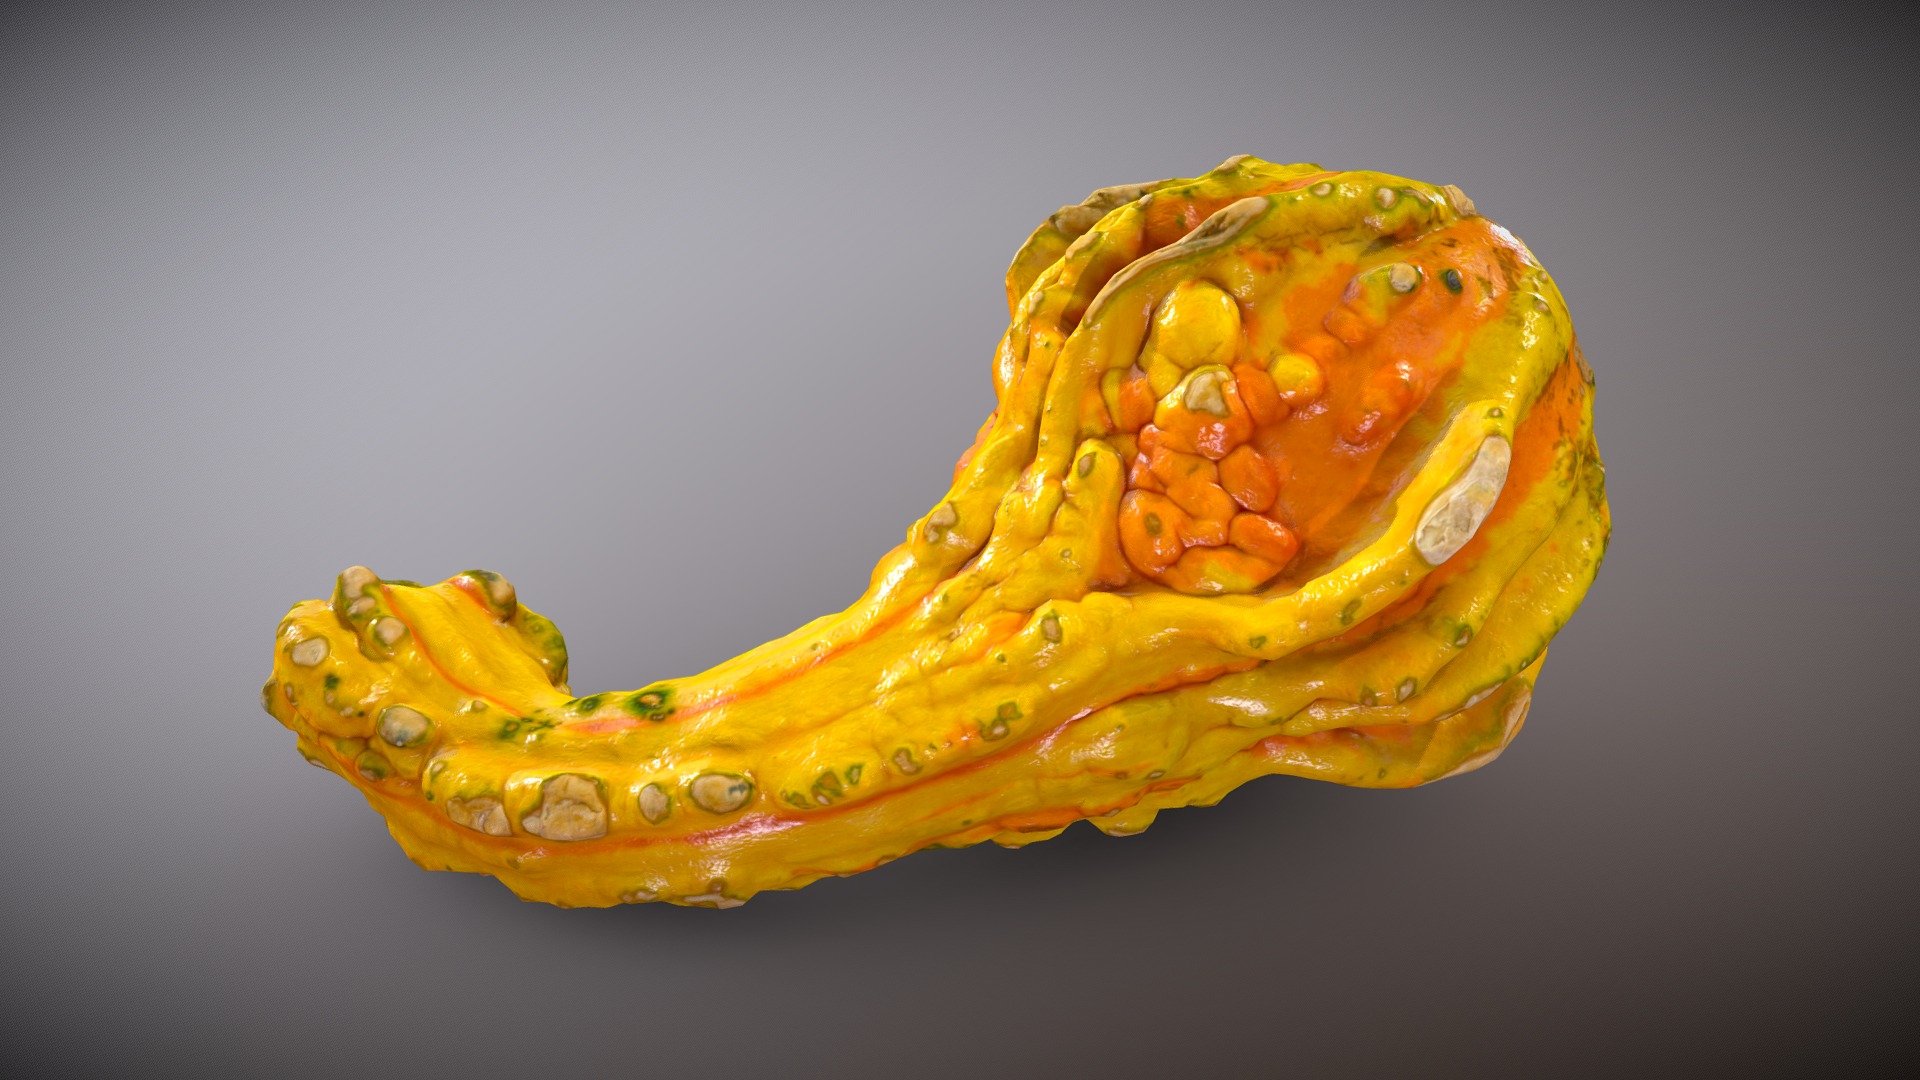 3D model Squash / Gourd (includes low poly model) - This is a 3D model of the Squash / Gourd (includes low poly model). The 3D model is about a yellow snake with a black background.